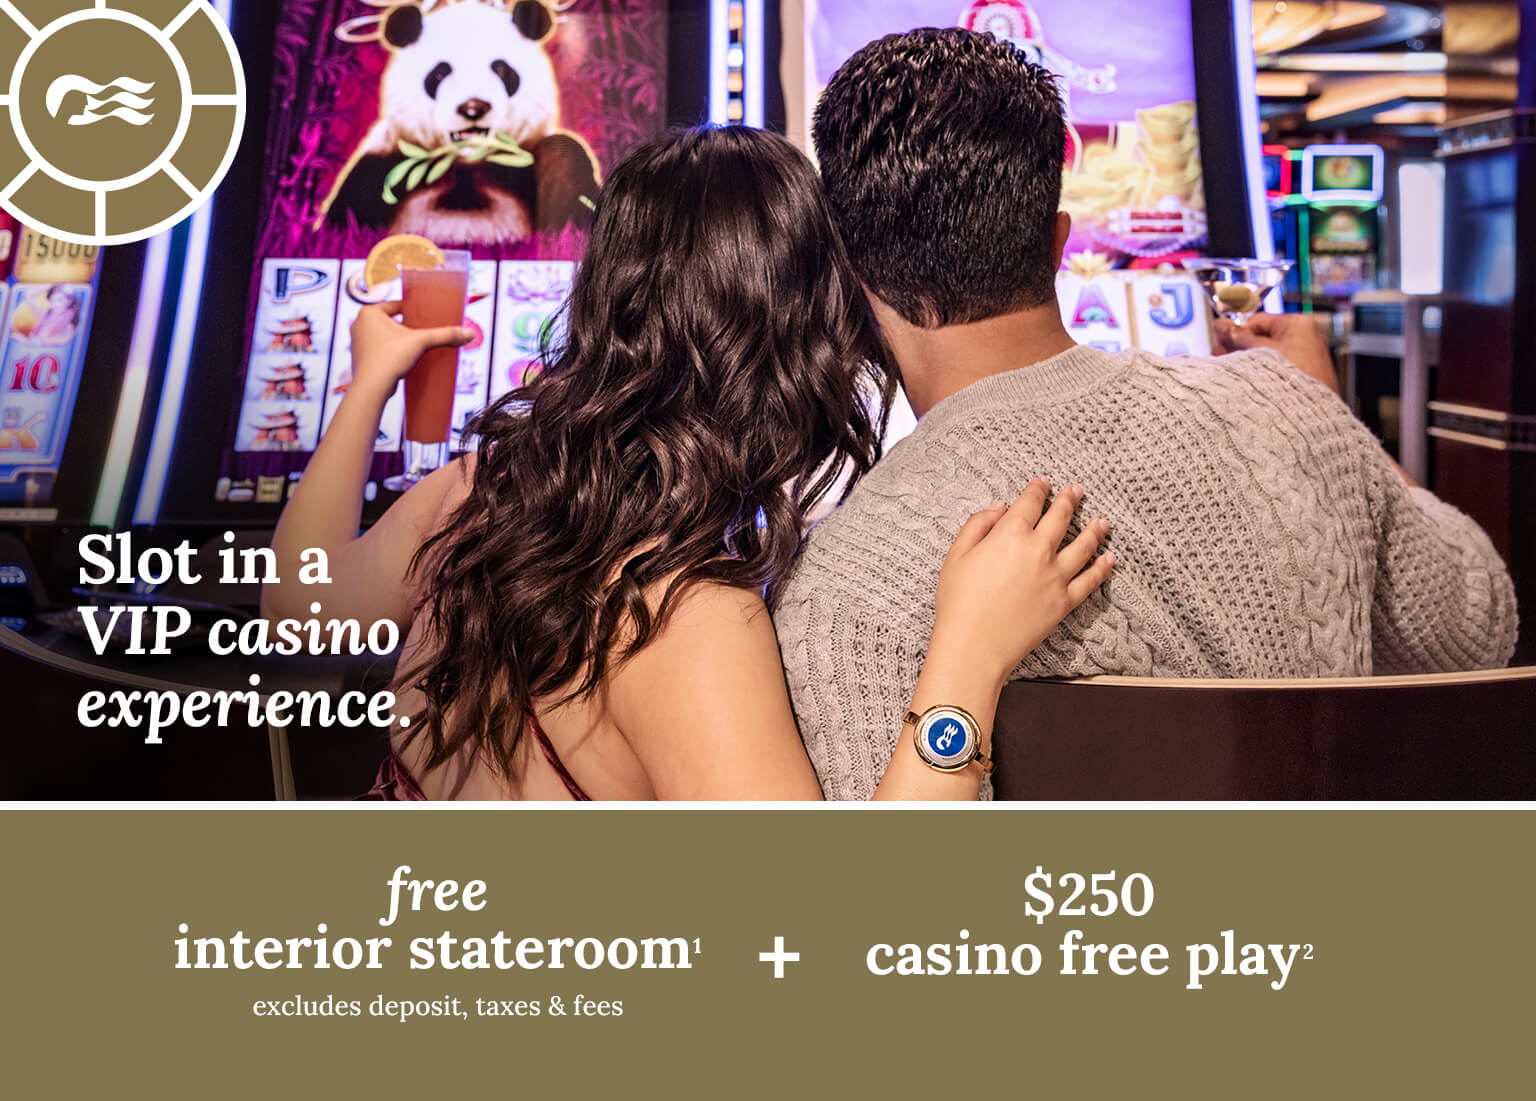 Slot in a VIP casino experience. Free interior stateroom + $250 casino free play + princess plus with drinks, Wi-Fi, and crew appreciation included